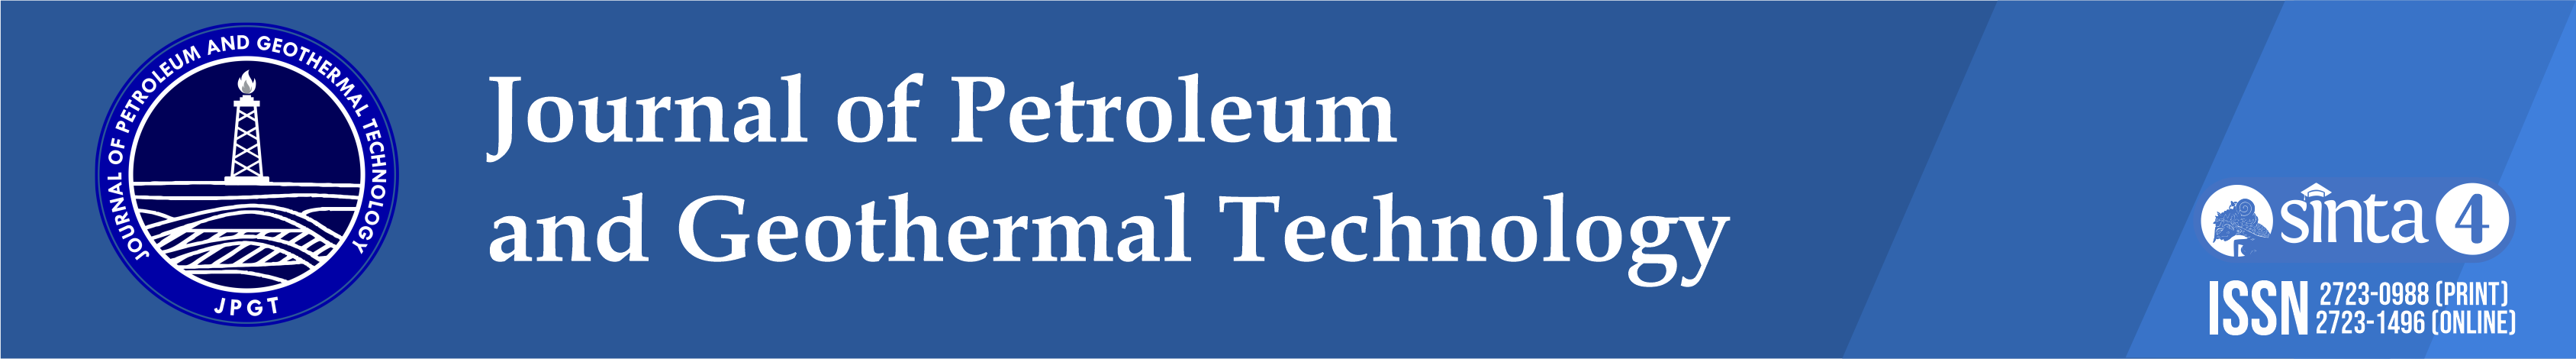 Journal of Petroleum and Geothermal Technology